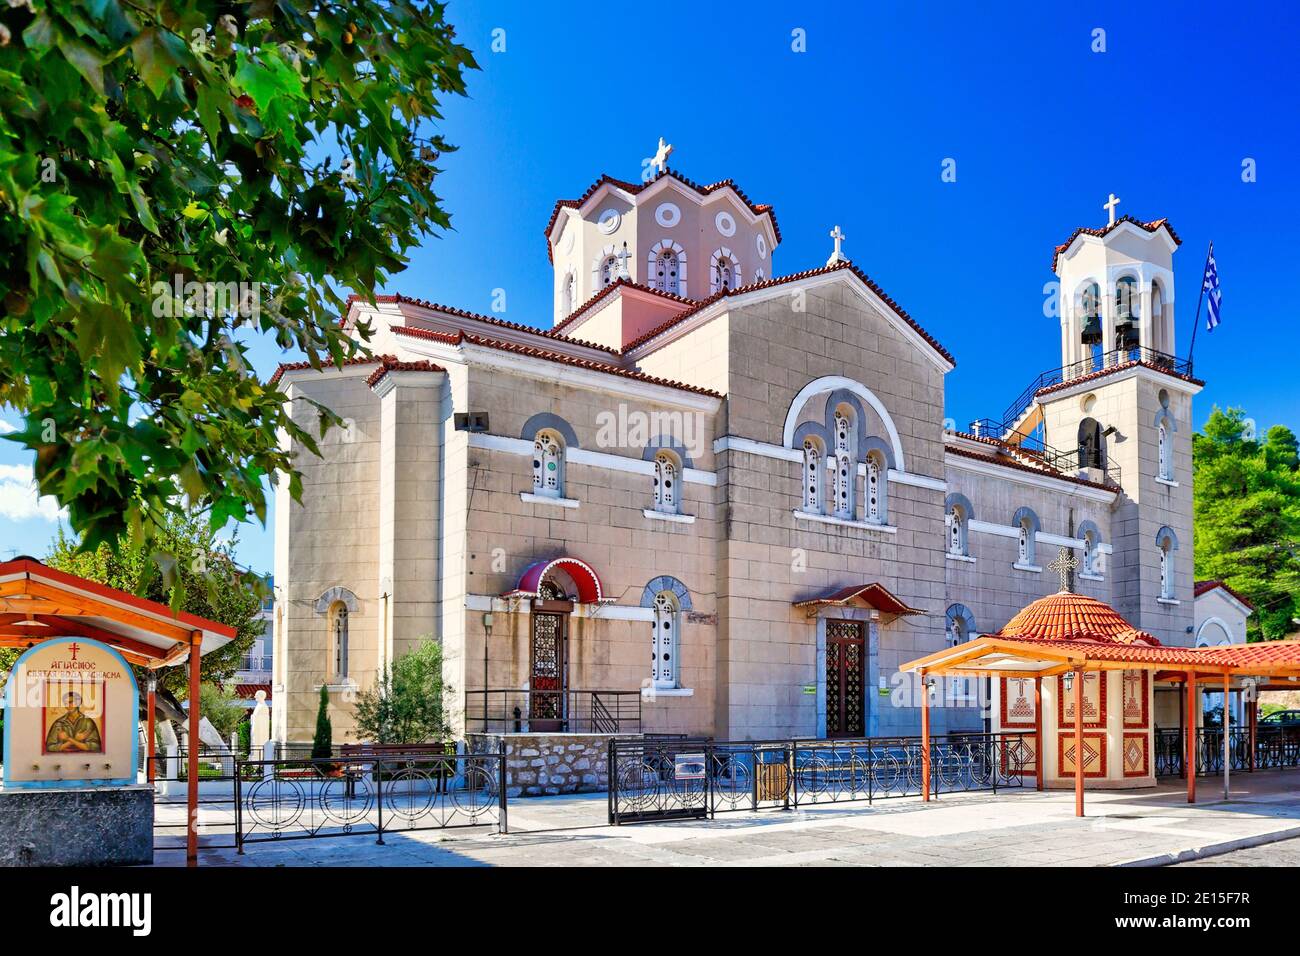 Agios Ioannis High Resolution Stock Photography and Images - Alamy